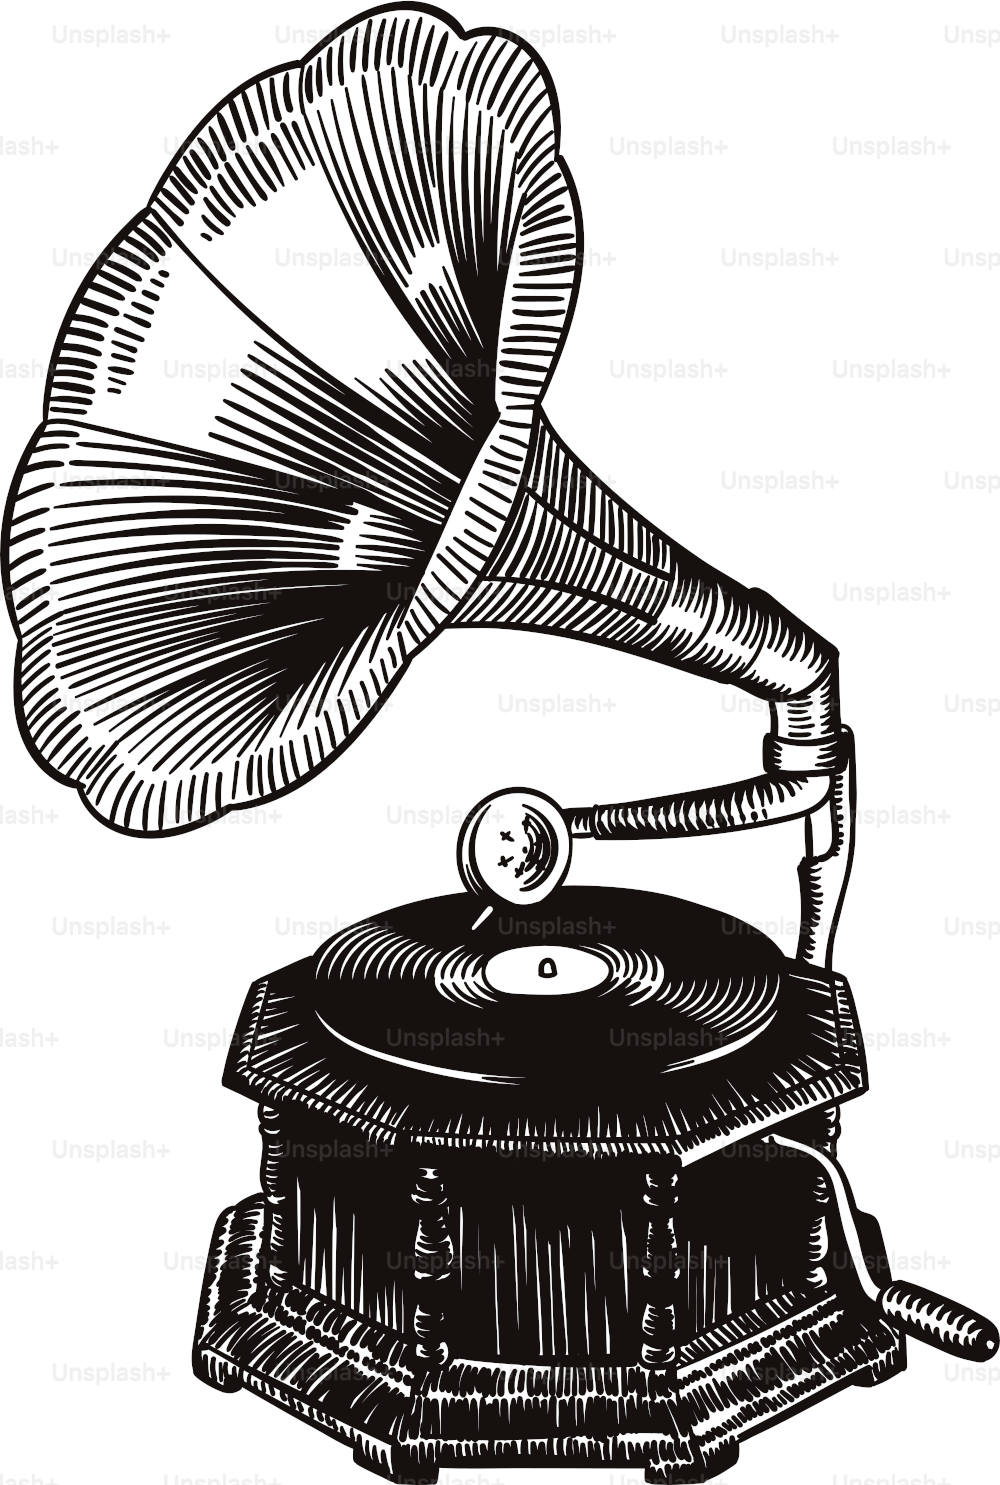 Drawing of an old record player